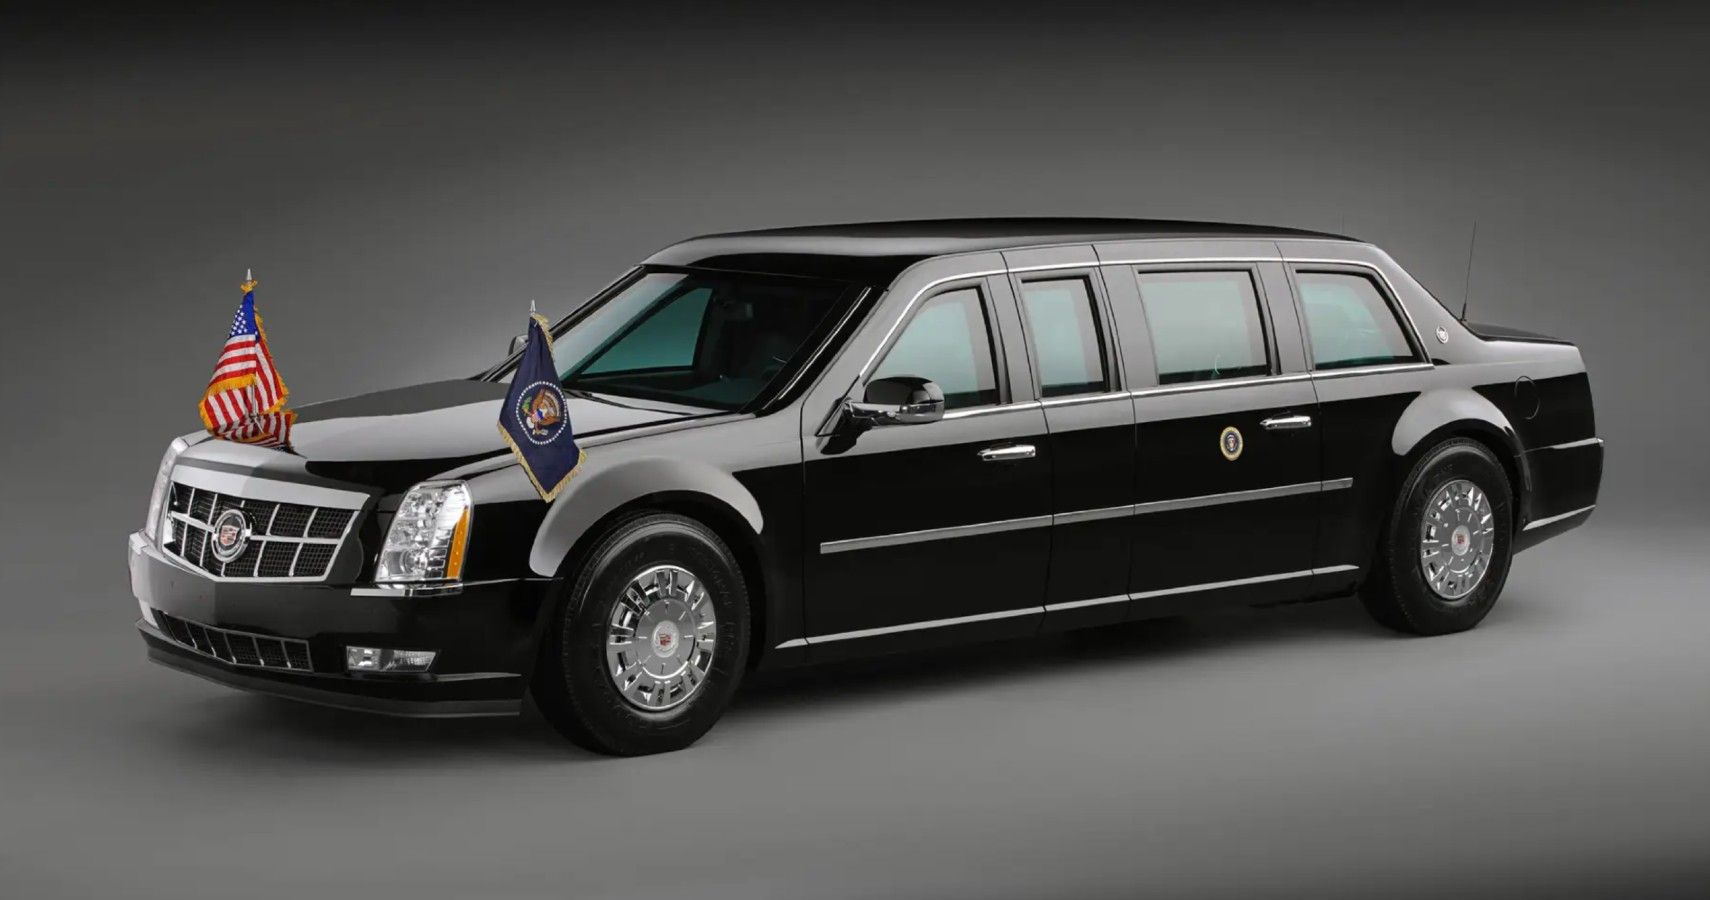 Presidential Cadillac limo front